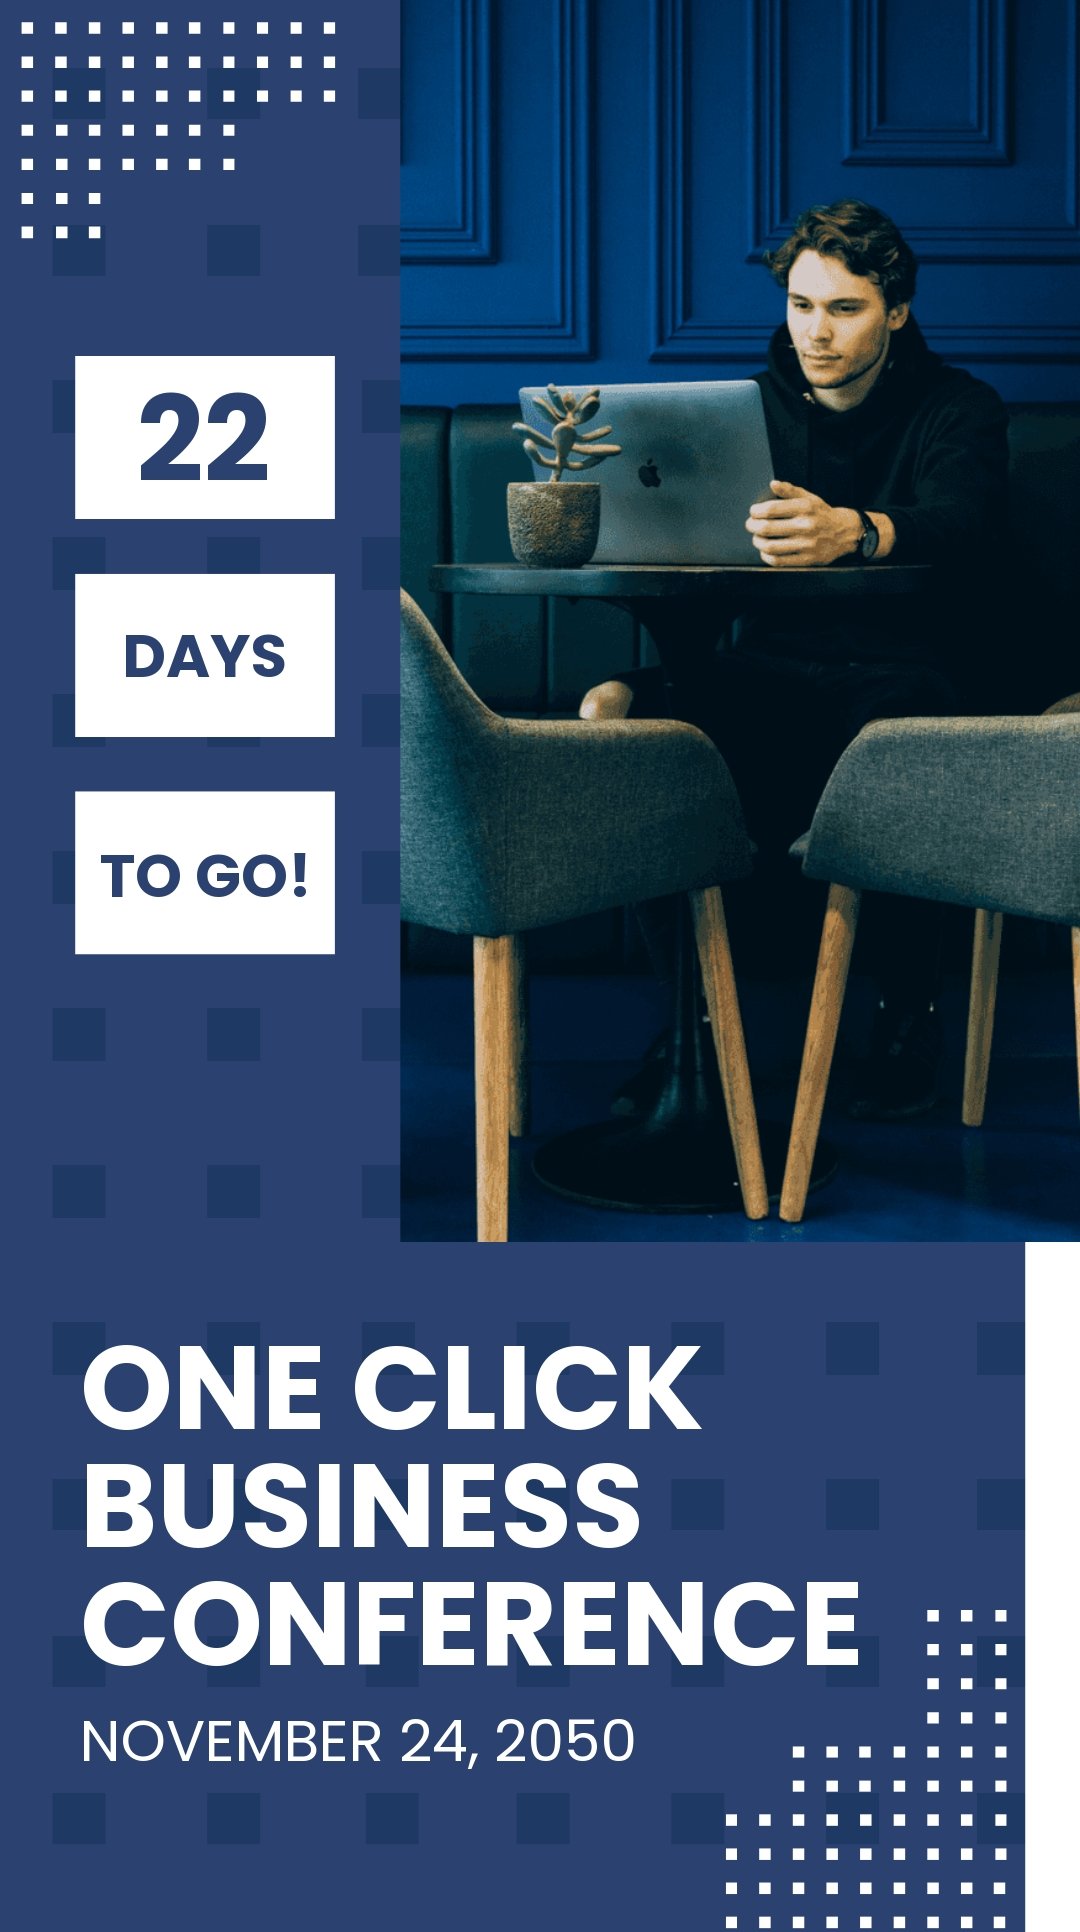 Conference Countdown Instagram Story Template